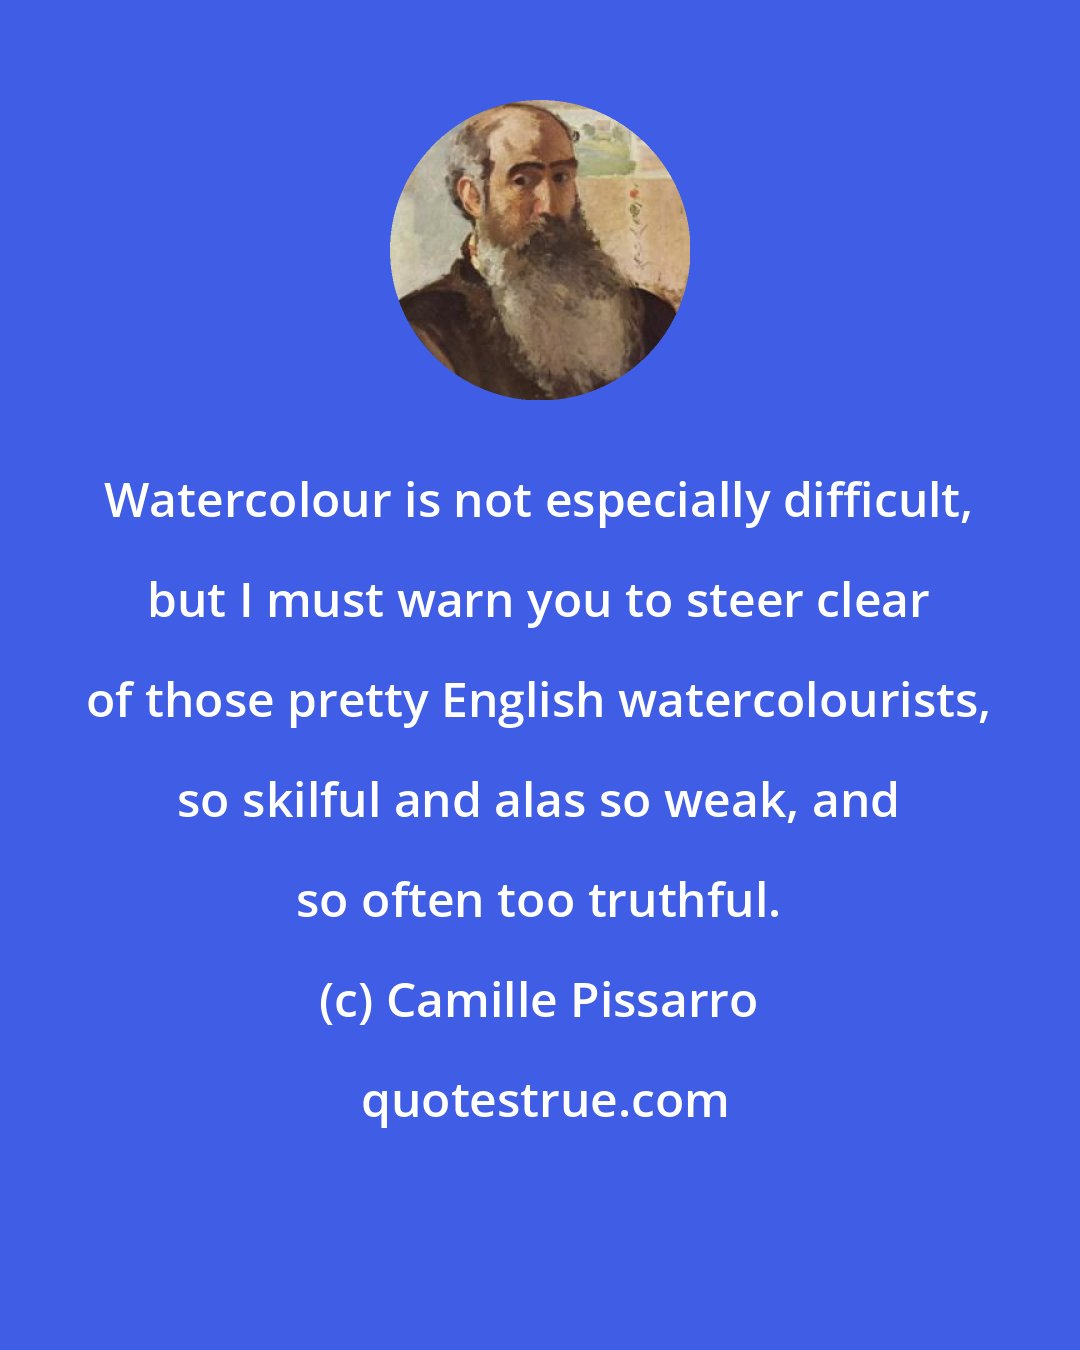 Camille Pissarro: Watercolour is not especially difficult, but I must warn you to steer clear of those pretty English watercolourists, so skilful and alas so weak, and so often too truthful.